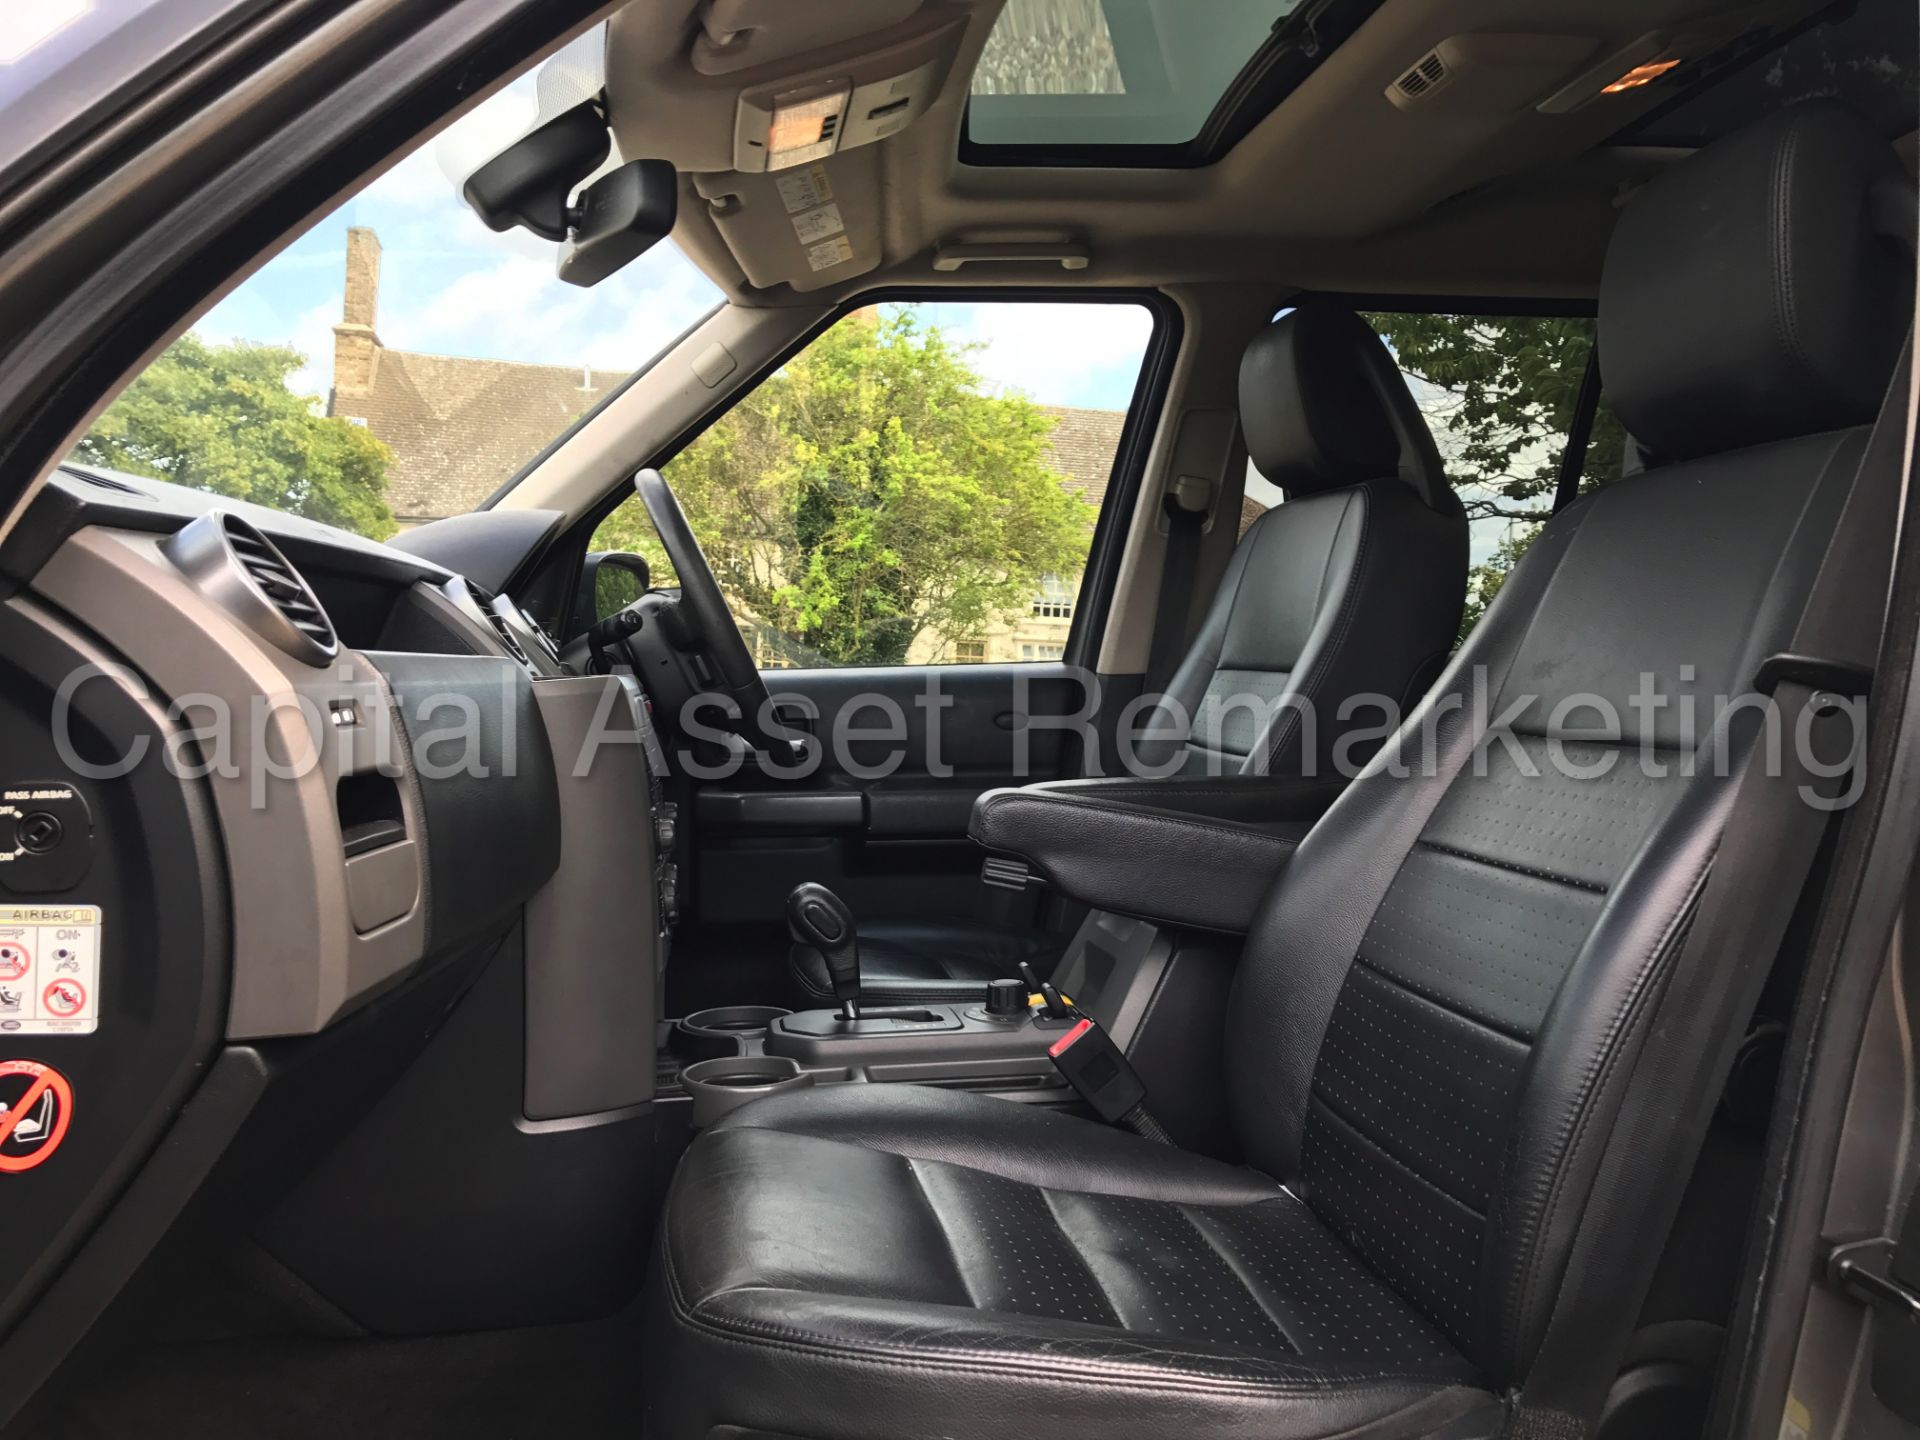 LAND ROVER DISCOVERY 3 'HSE' (2007) 'TDV6 - AUTO - LEATHER - SAT NAV - 7 SEATER' **MASSIVE SPEC** - Image 14 of 34